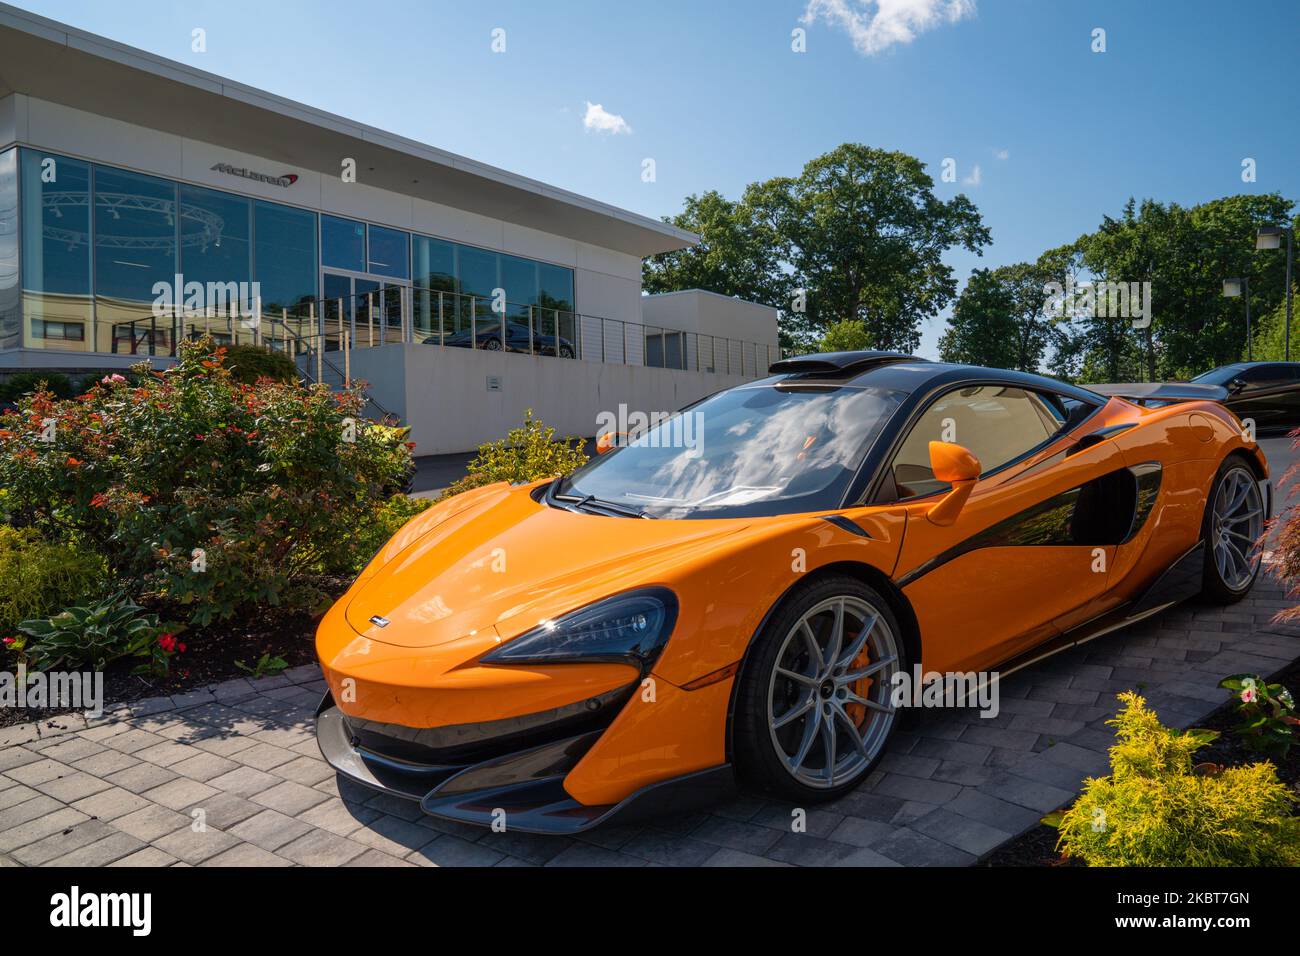 A view of McLaren dealership in Queens, New York, USA., on July 4, 2020. (Photo by John Nacion/NurPhoto) Stock Photo